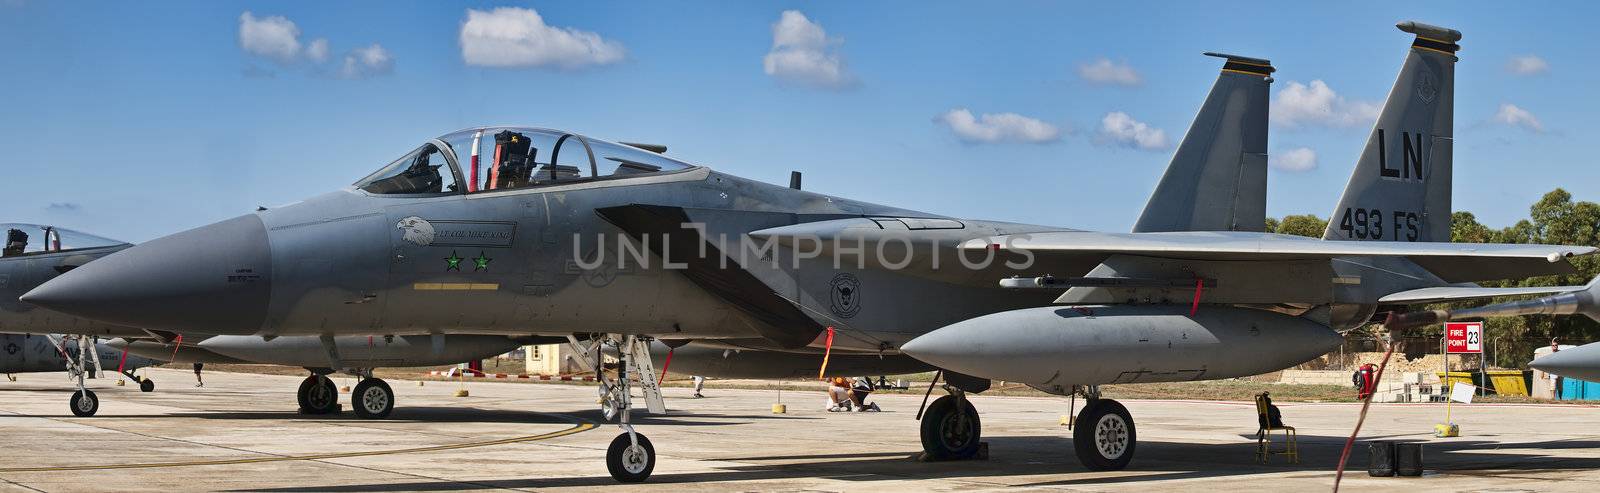 LUQA, MALTA - SEP 26 - F15 Eagle piloted by Lt. Col. Mike King during the Malta International Airshow 26th September 2009